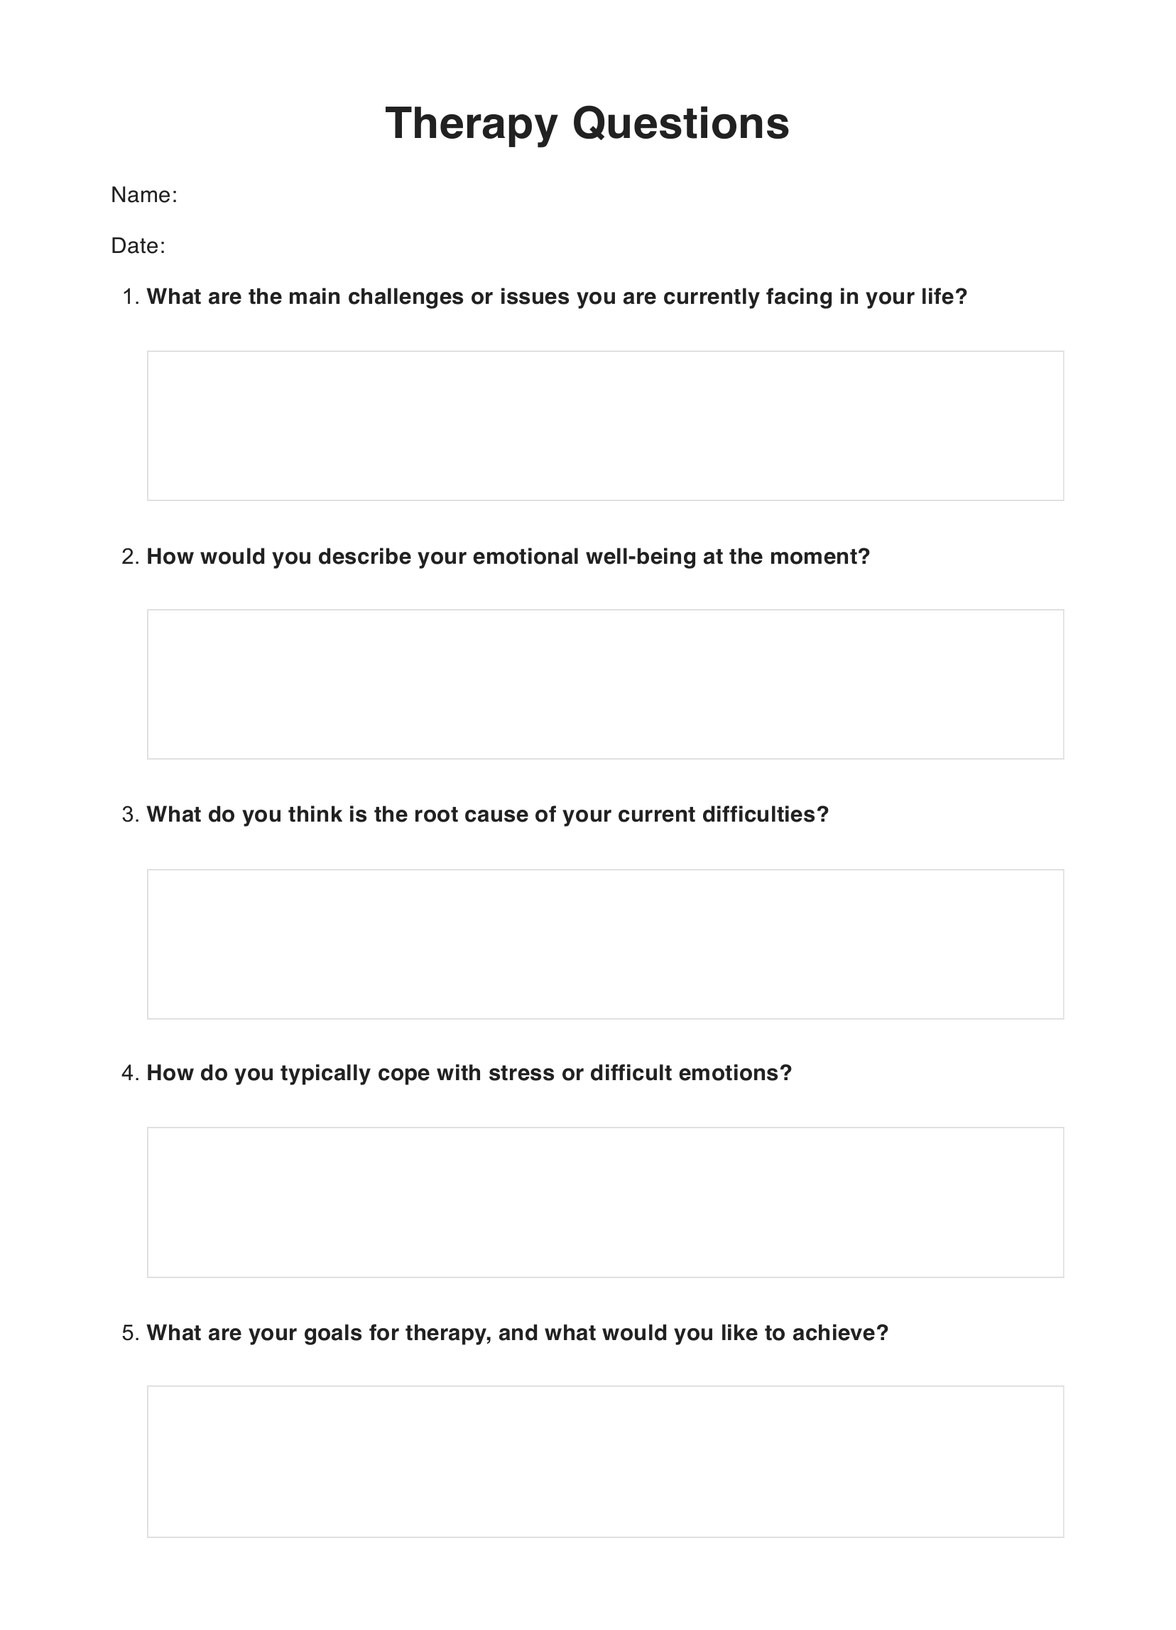 Therapy Questions PDF Example